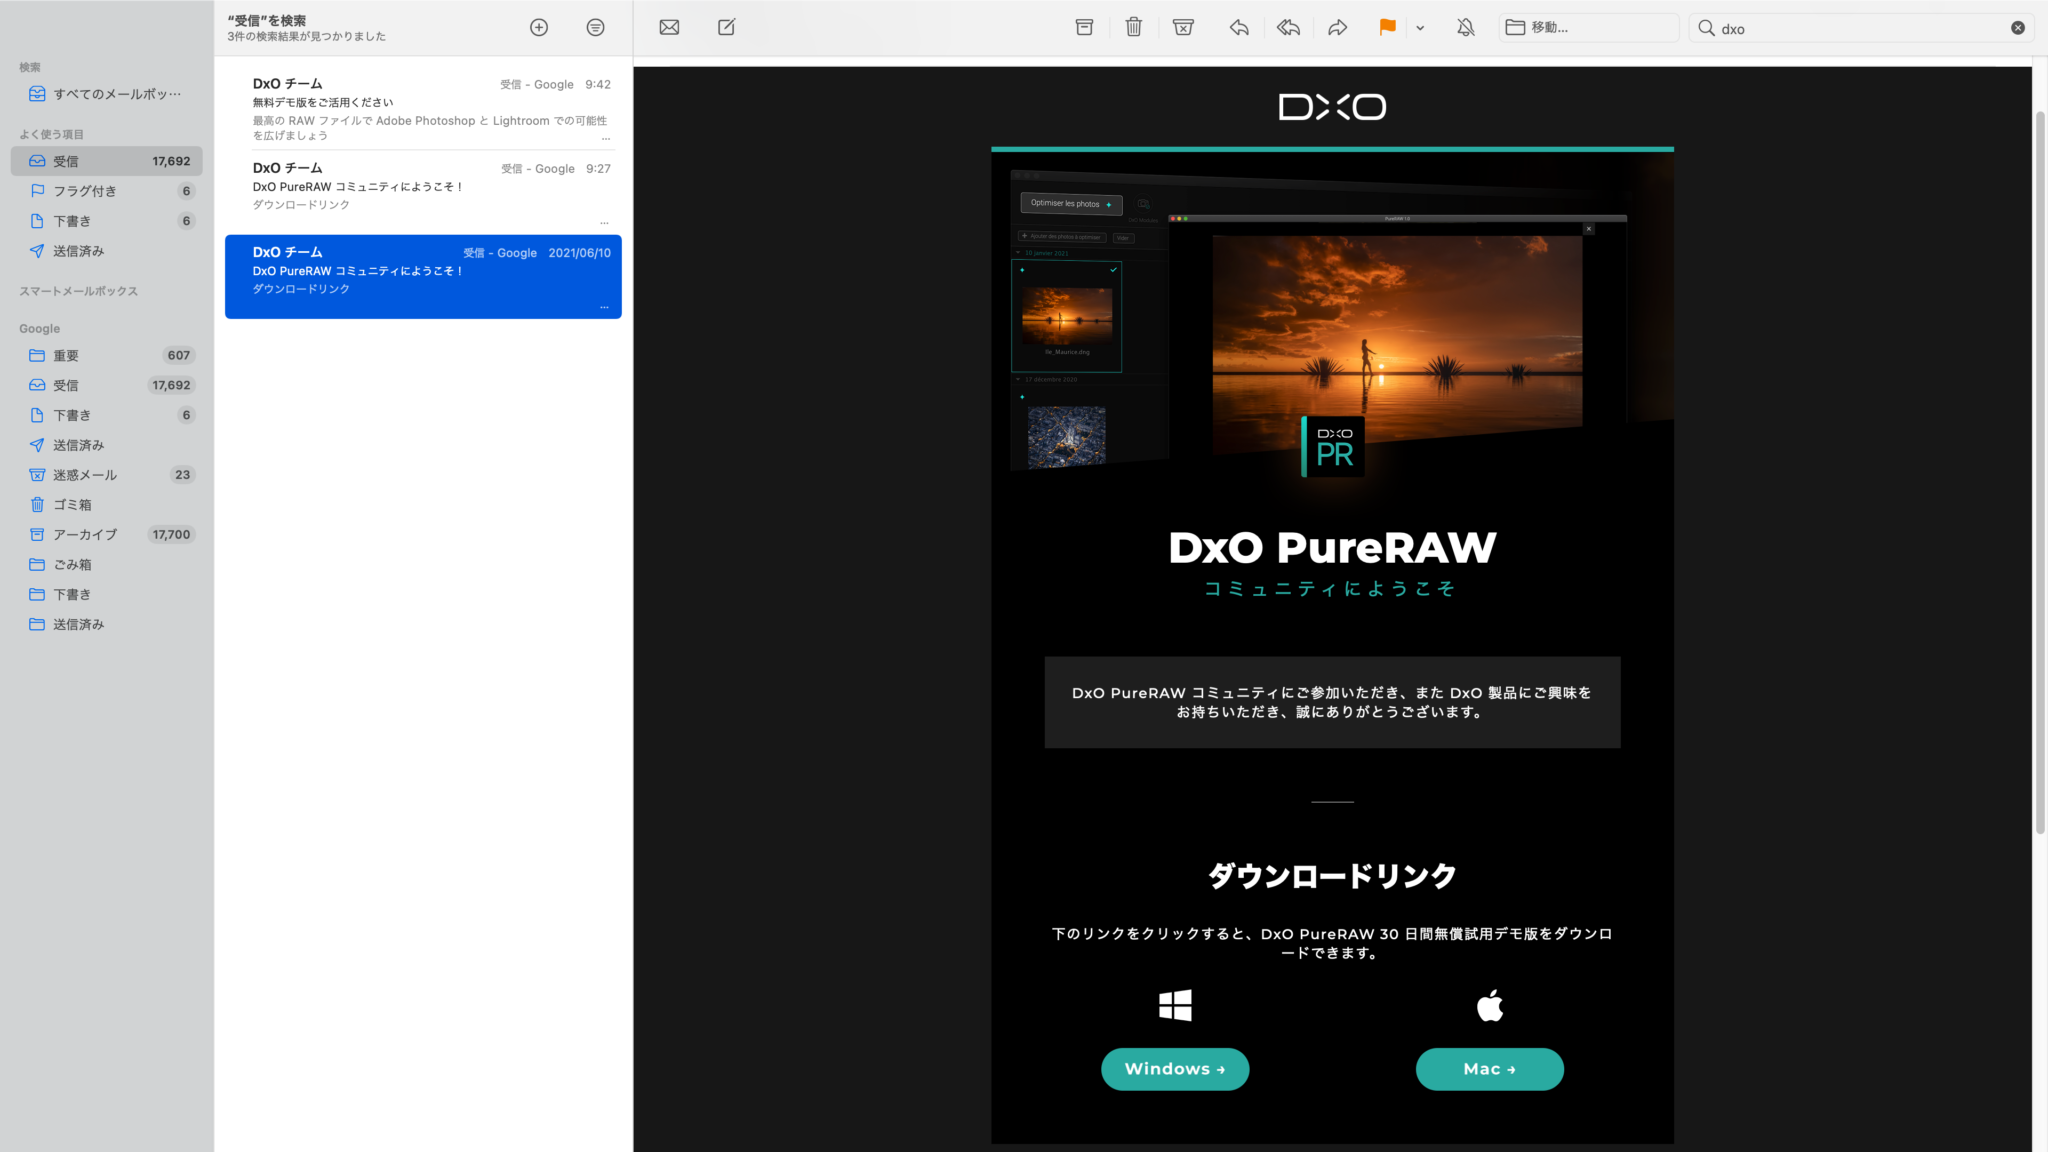 instal the new version for ios DxO PureRAW 3.4.0.16